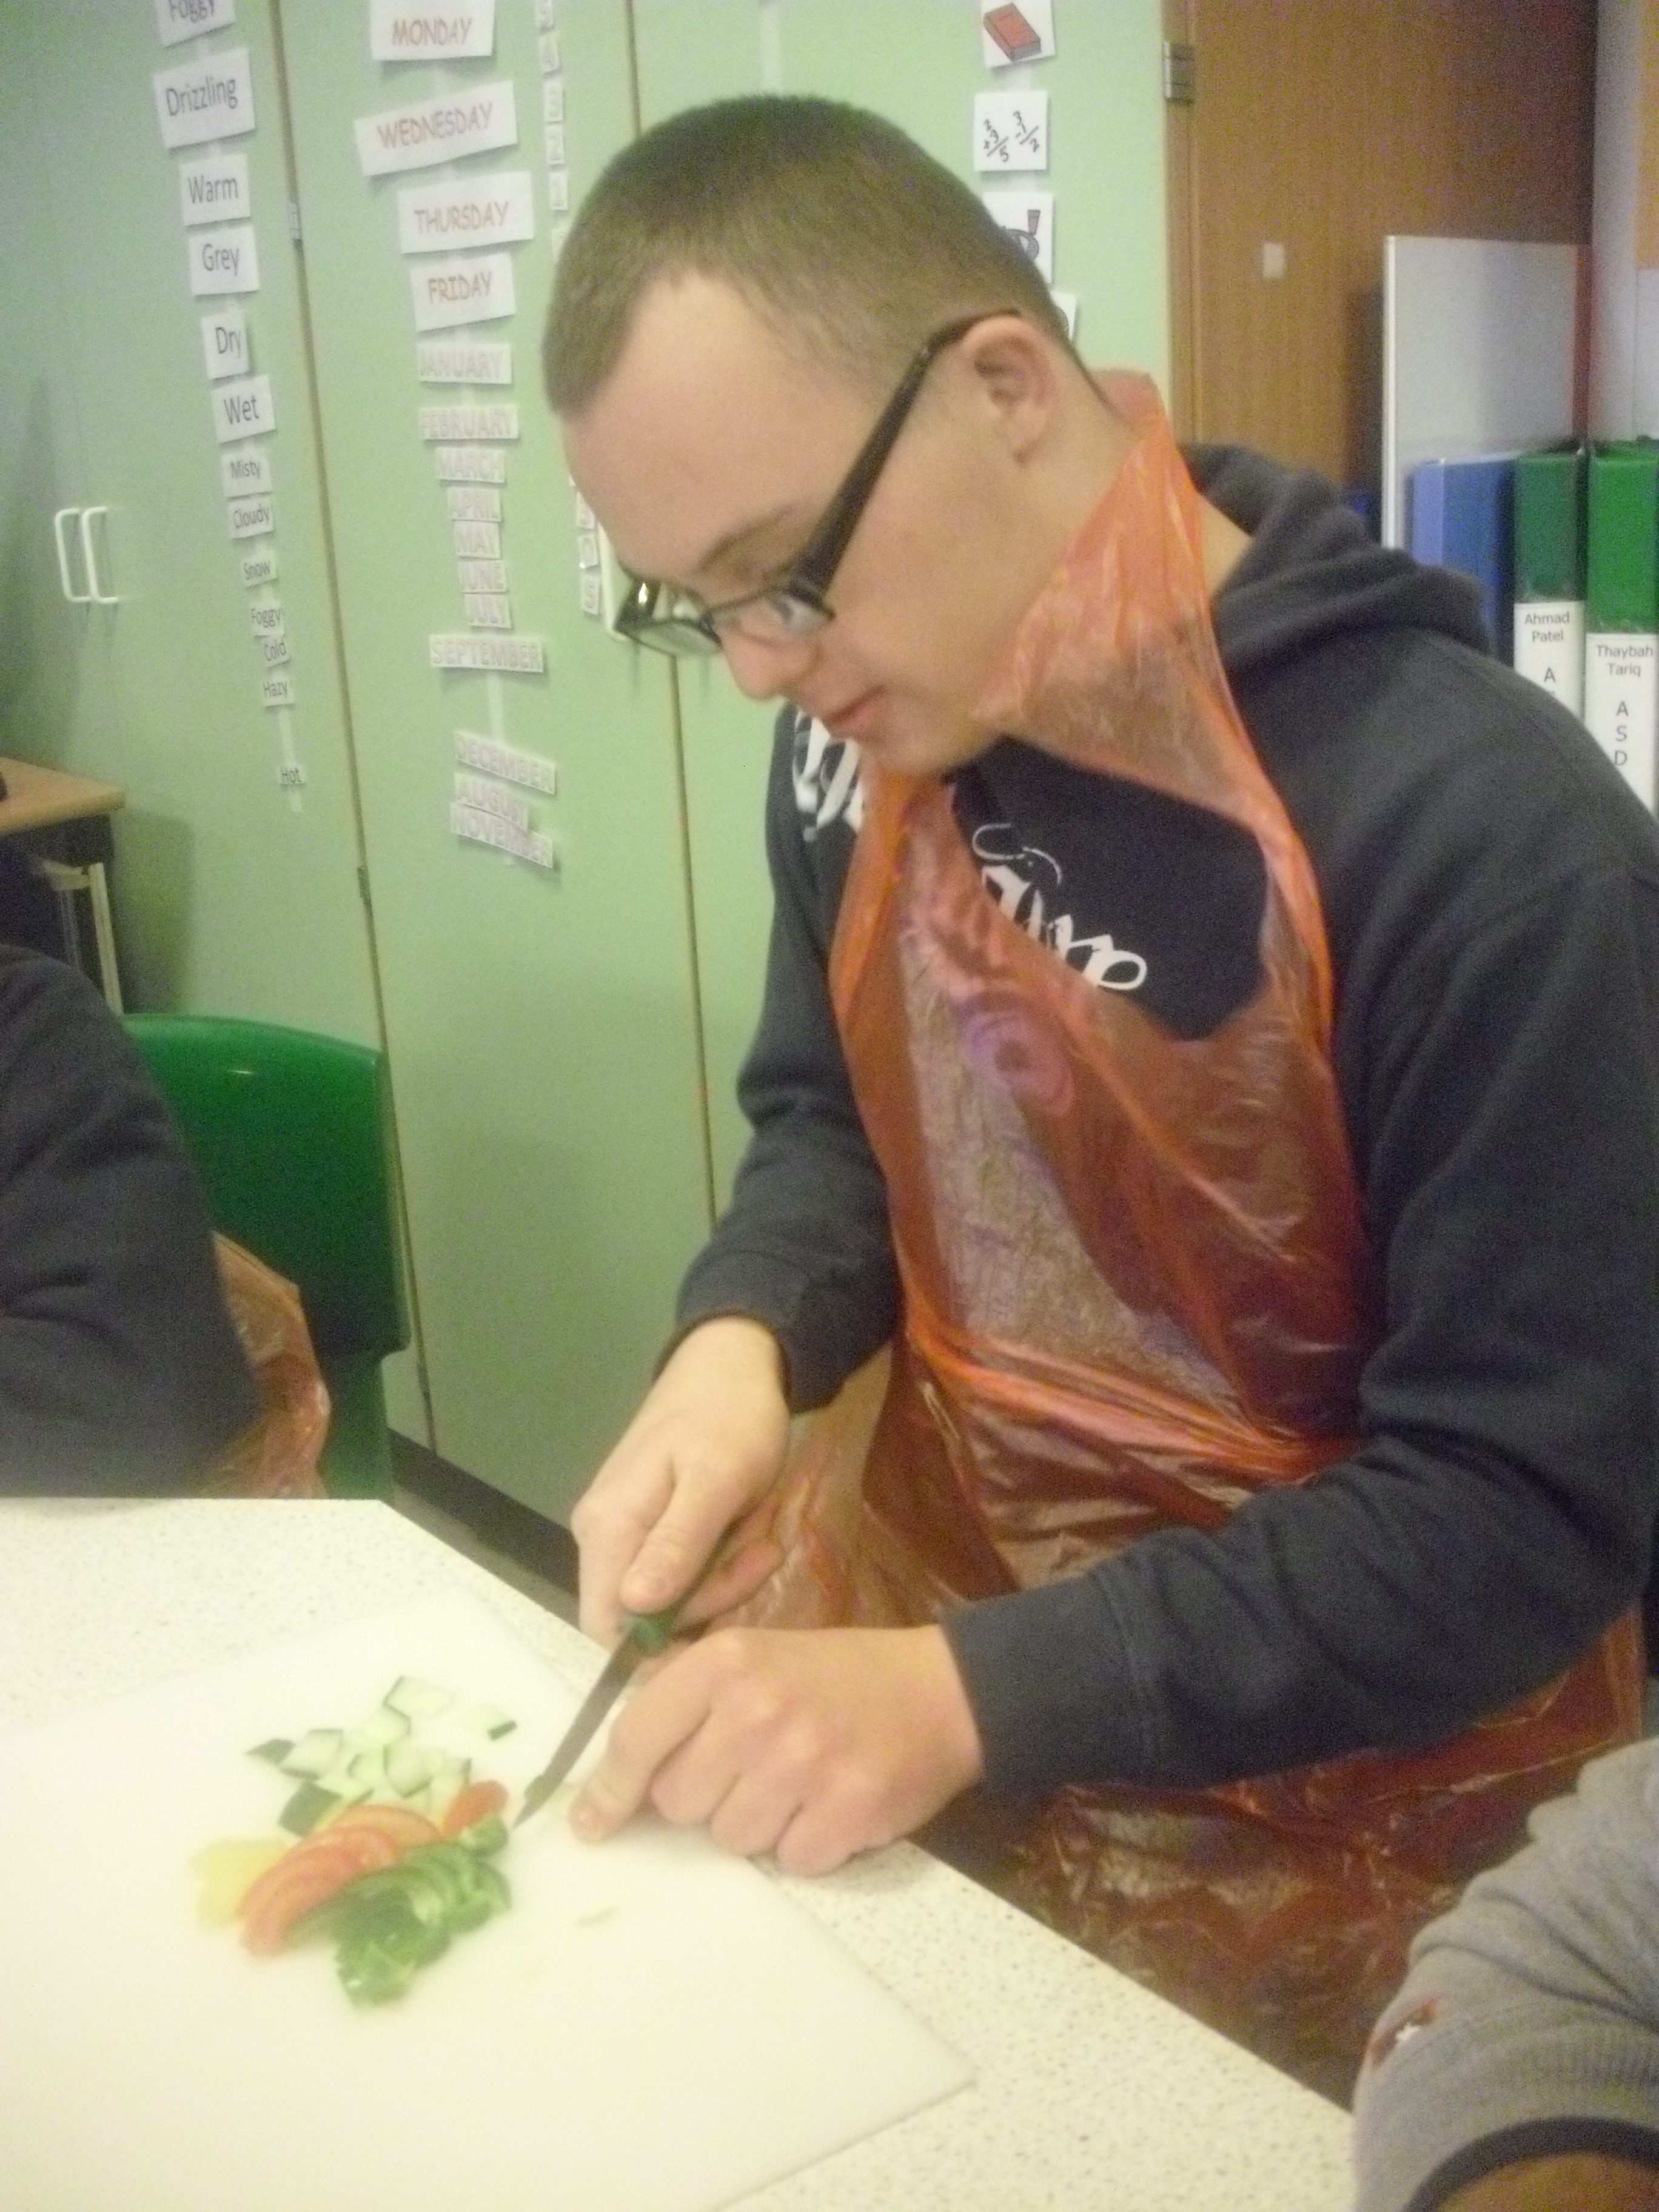 Independent living skills sessions